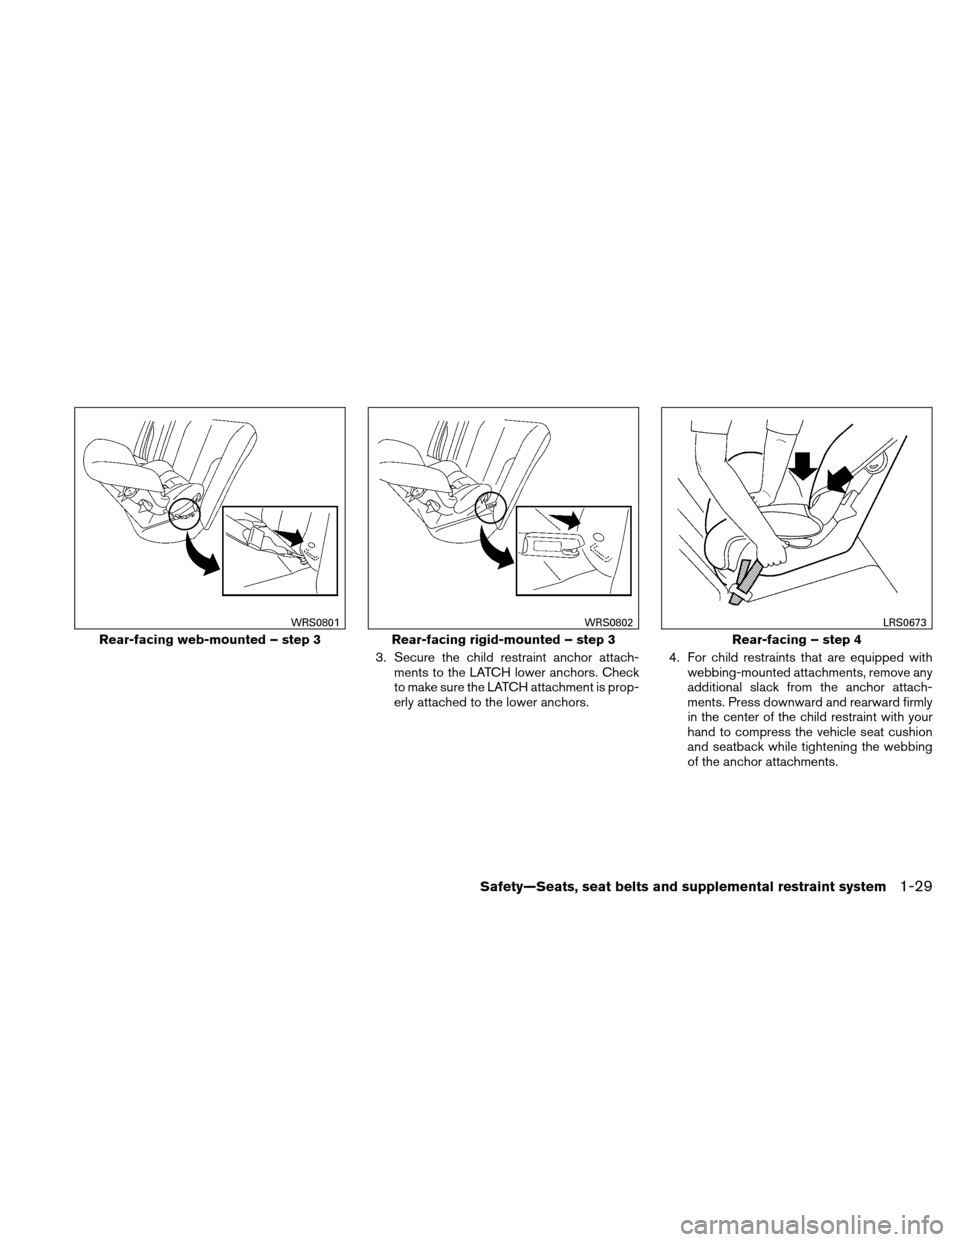 NISSAN ALTIMA COUPE 2010 D32 / 4.G Service Manual 3. Secure the child restraint anchor attach-ments to the LATCH lower anchors. Check
to make sure the LATCH attachment is prop-
erly attached to the lower anchors. 4. For child restraints that are equi